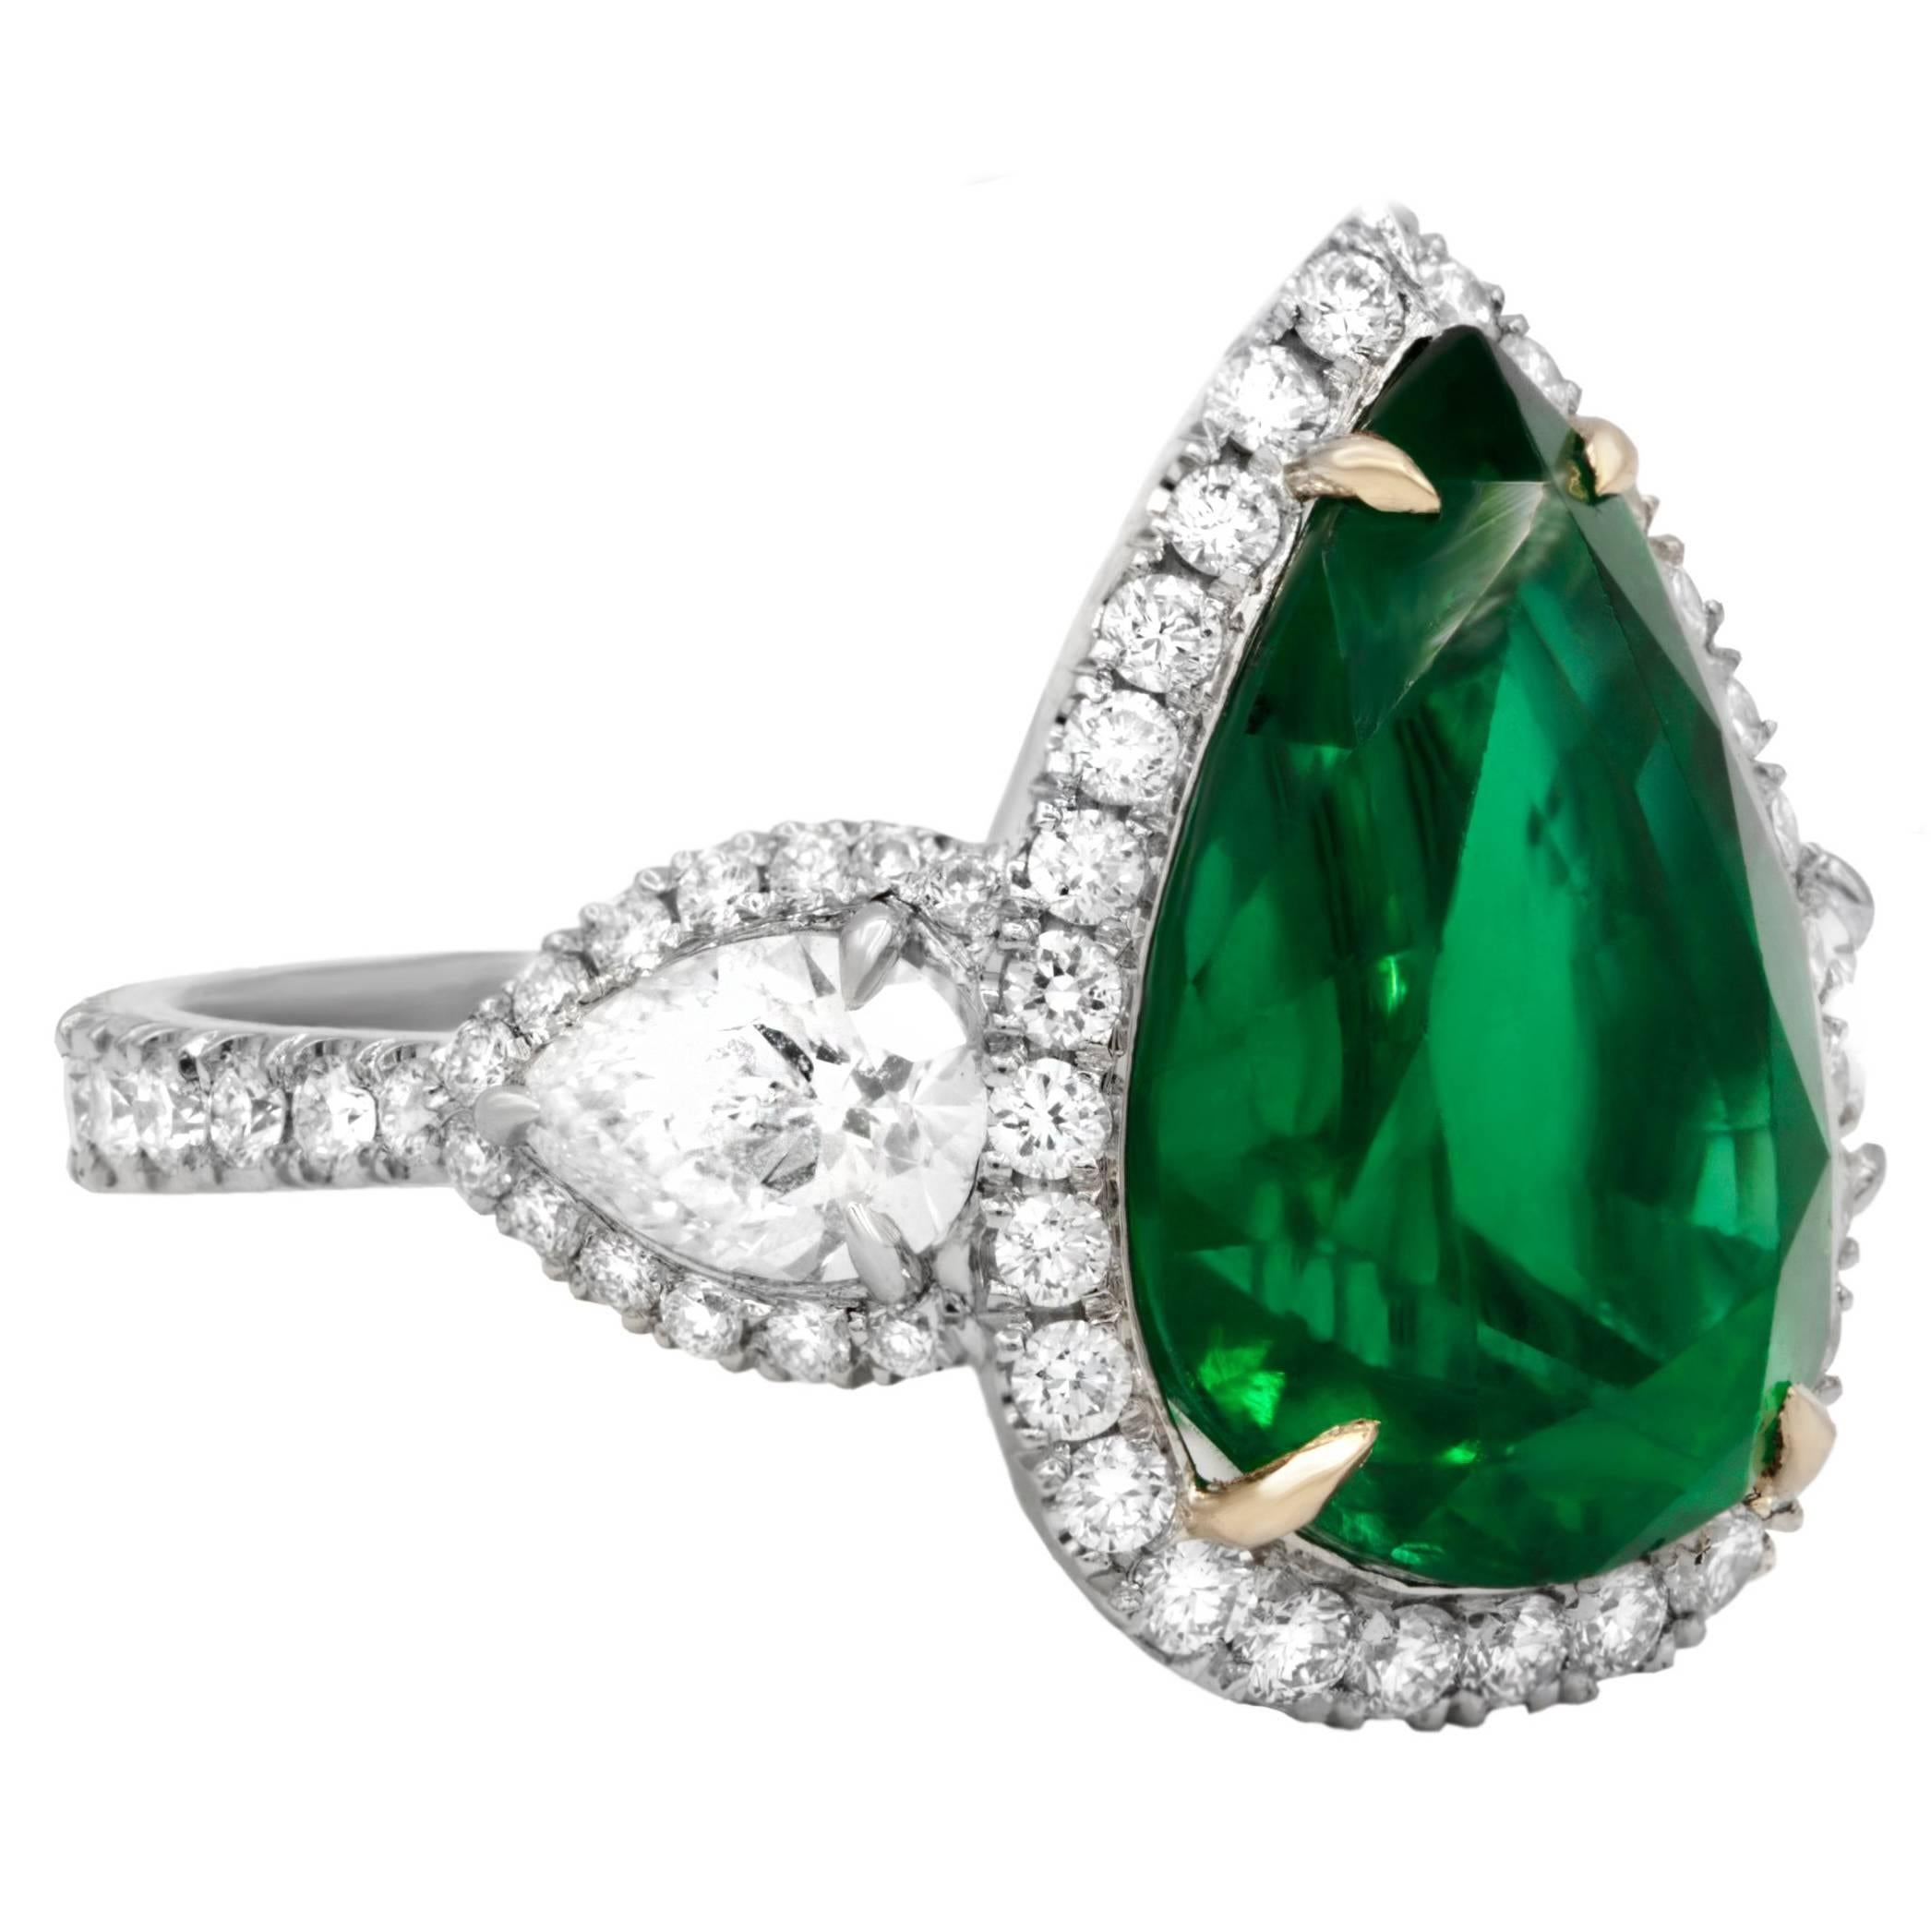 GIA Certified 8.78 Carat Green Emerald Pear Shaped Platinum Ring with Diamonds